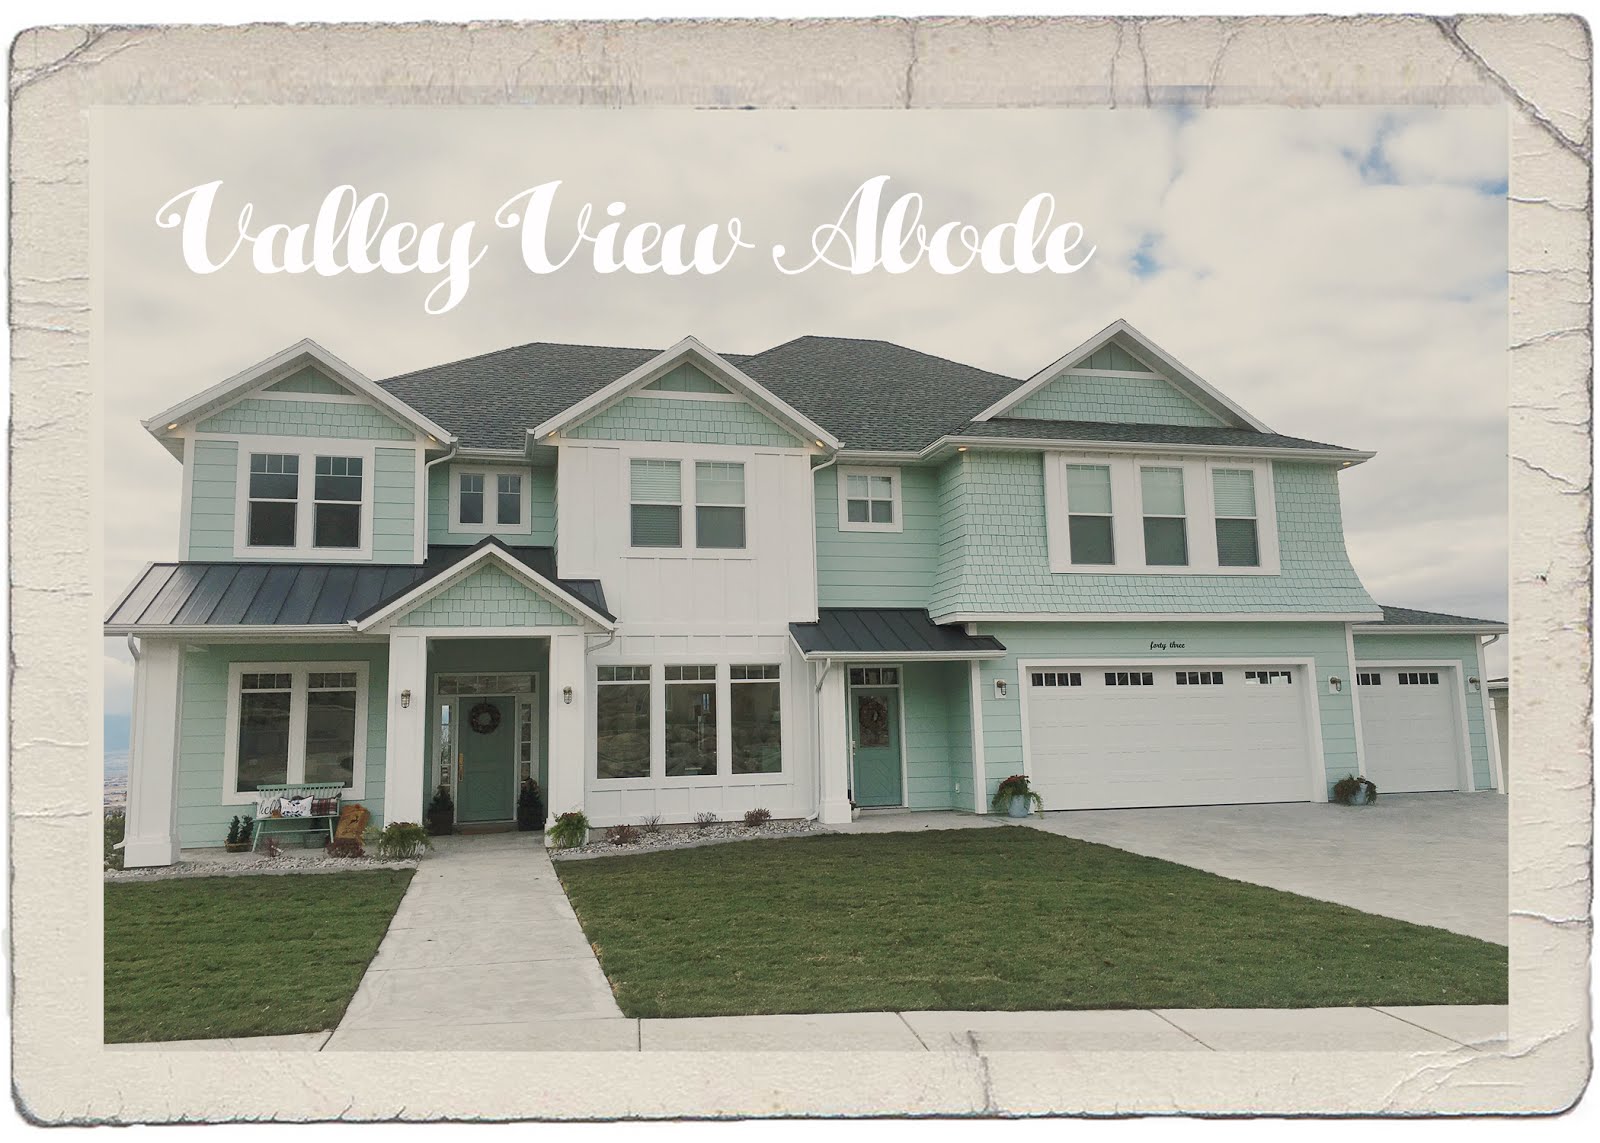 Valley View Abode